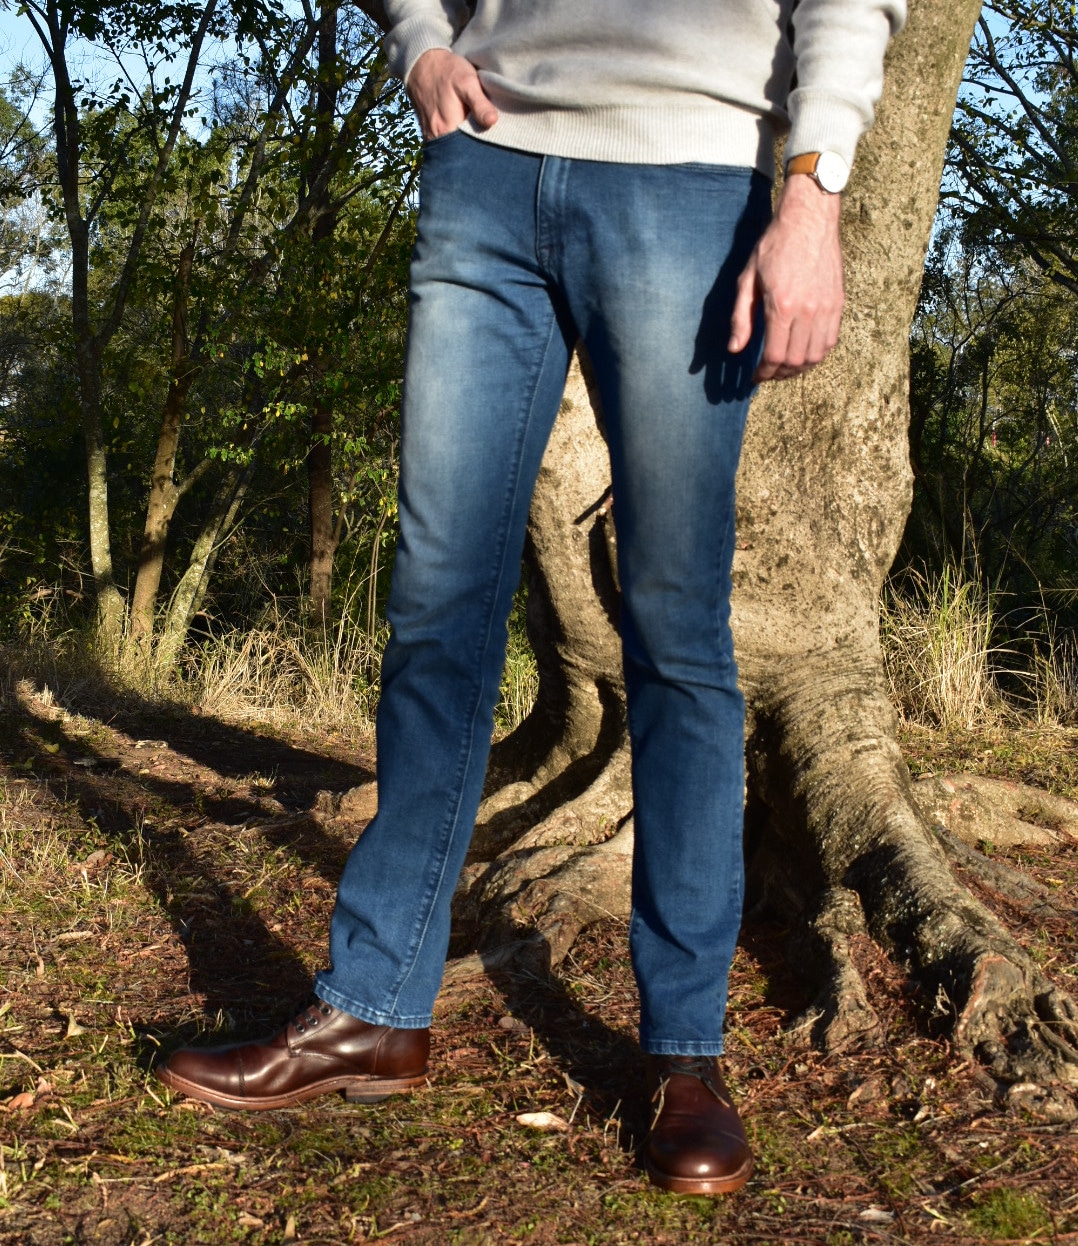 Model Wearing Mott & Bow Slim Laight Jeans with Liam Sweater Standing Up and Standing Next to Tree With Hand in Pocket and with White Sneakers - Torso Shot